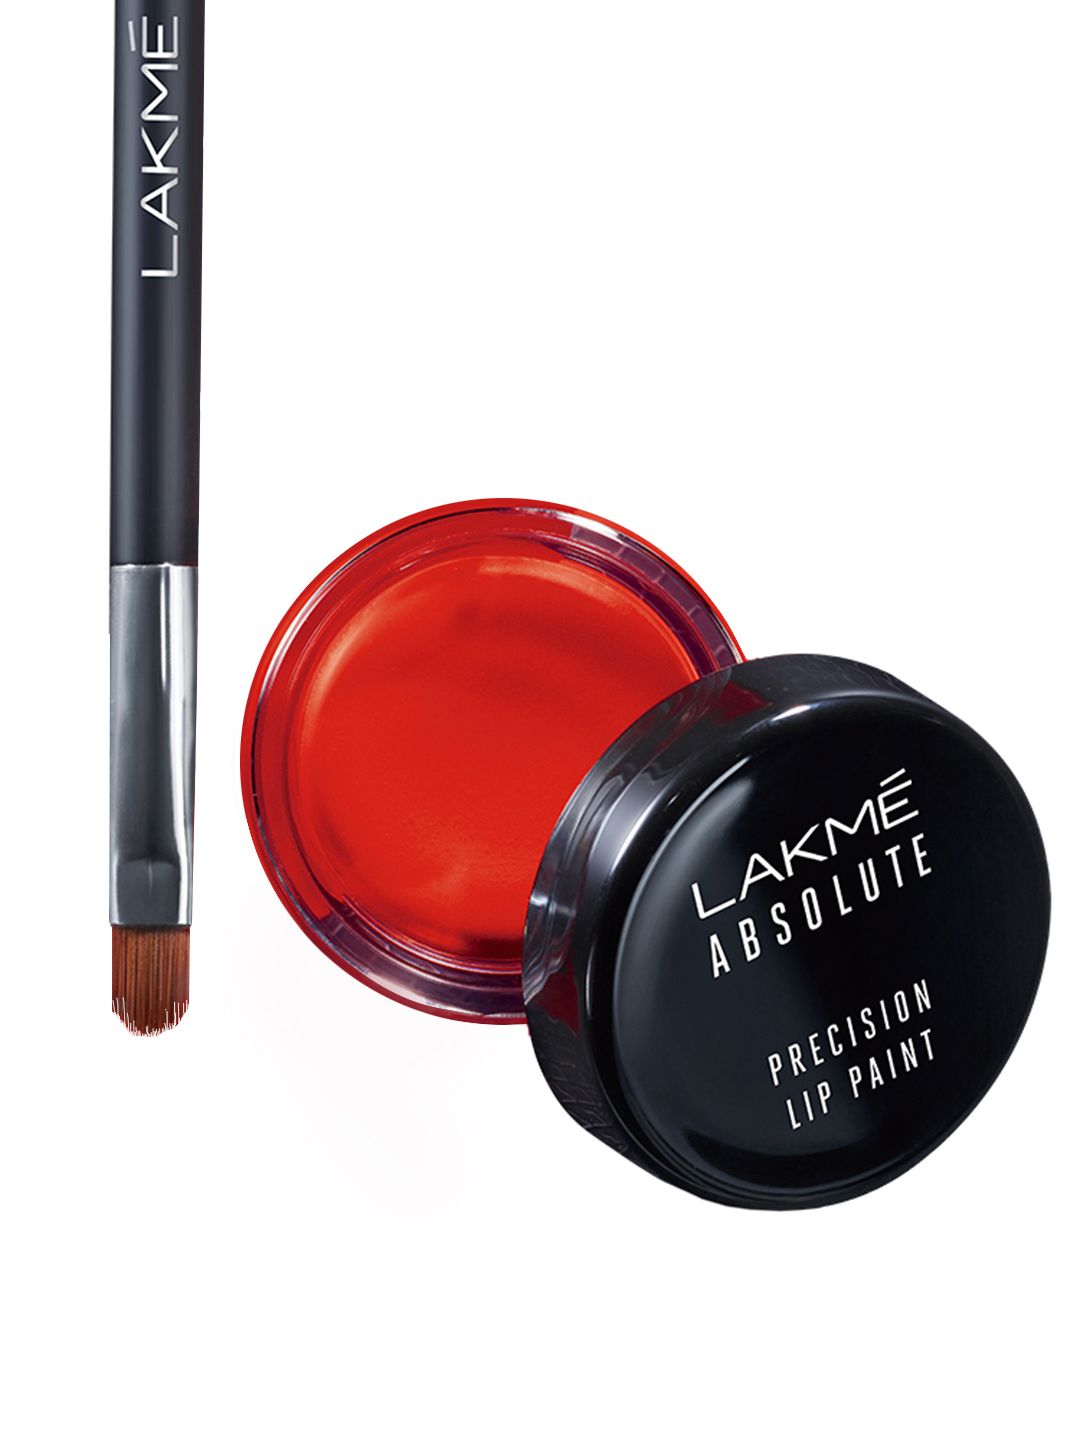 Lakme Absolute Precision Lip Paint - Atomic Coral 401 Price in India